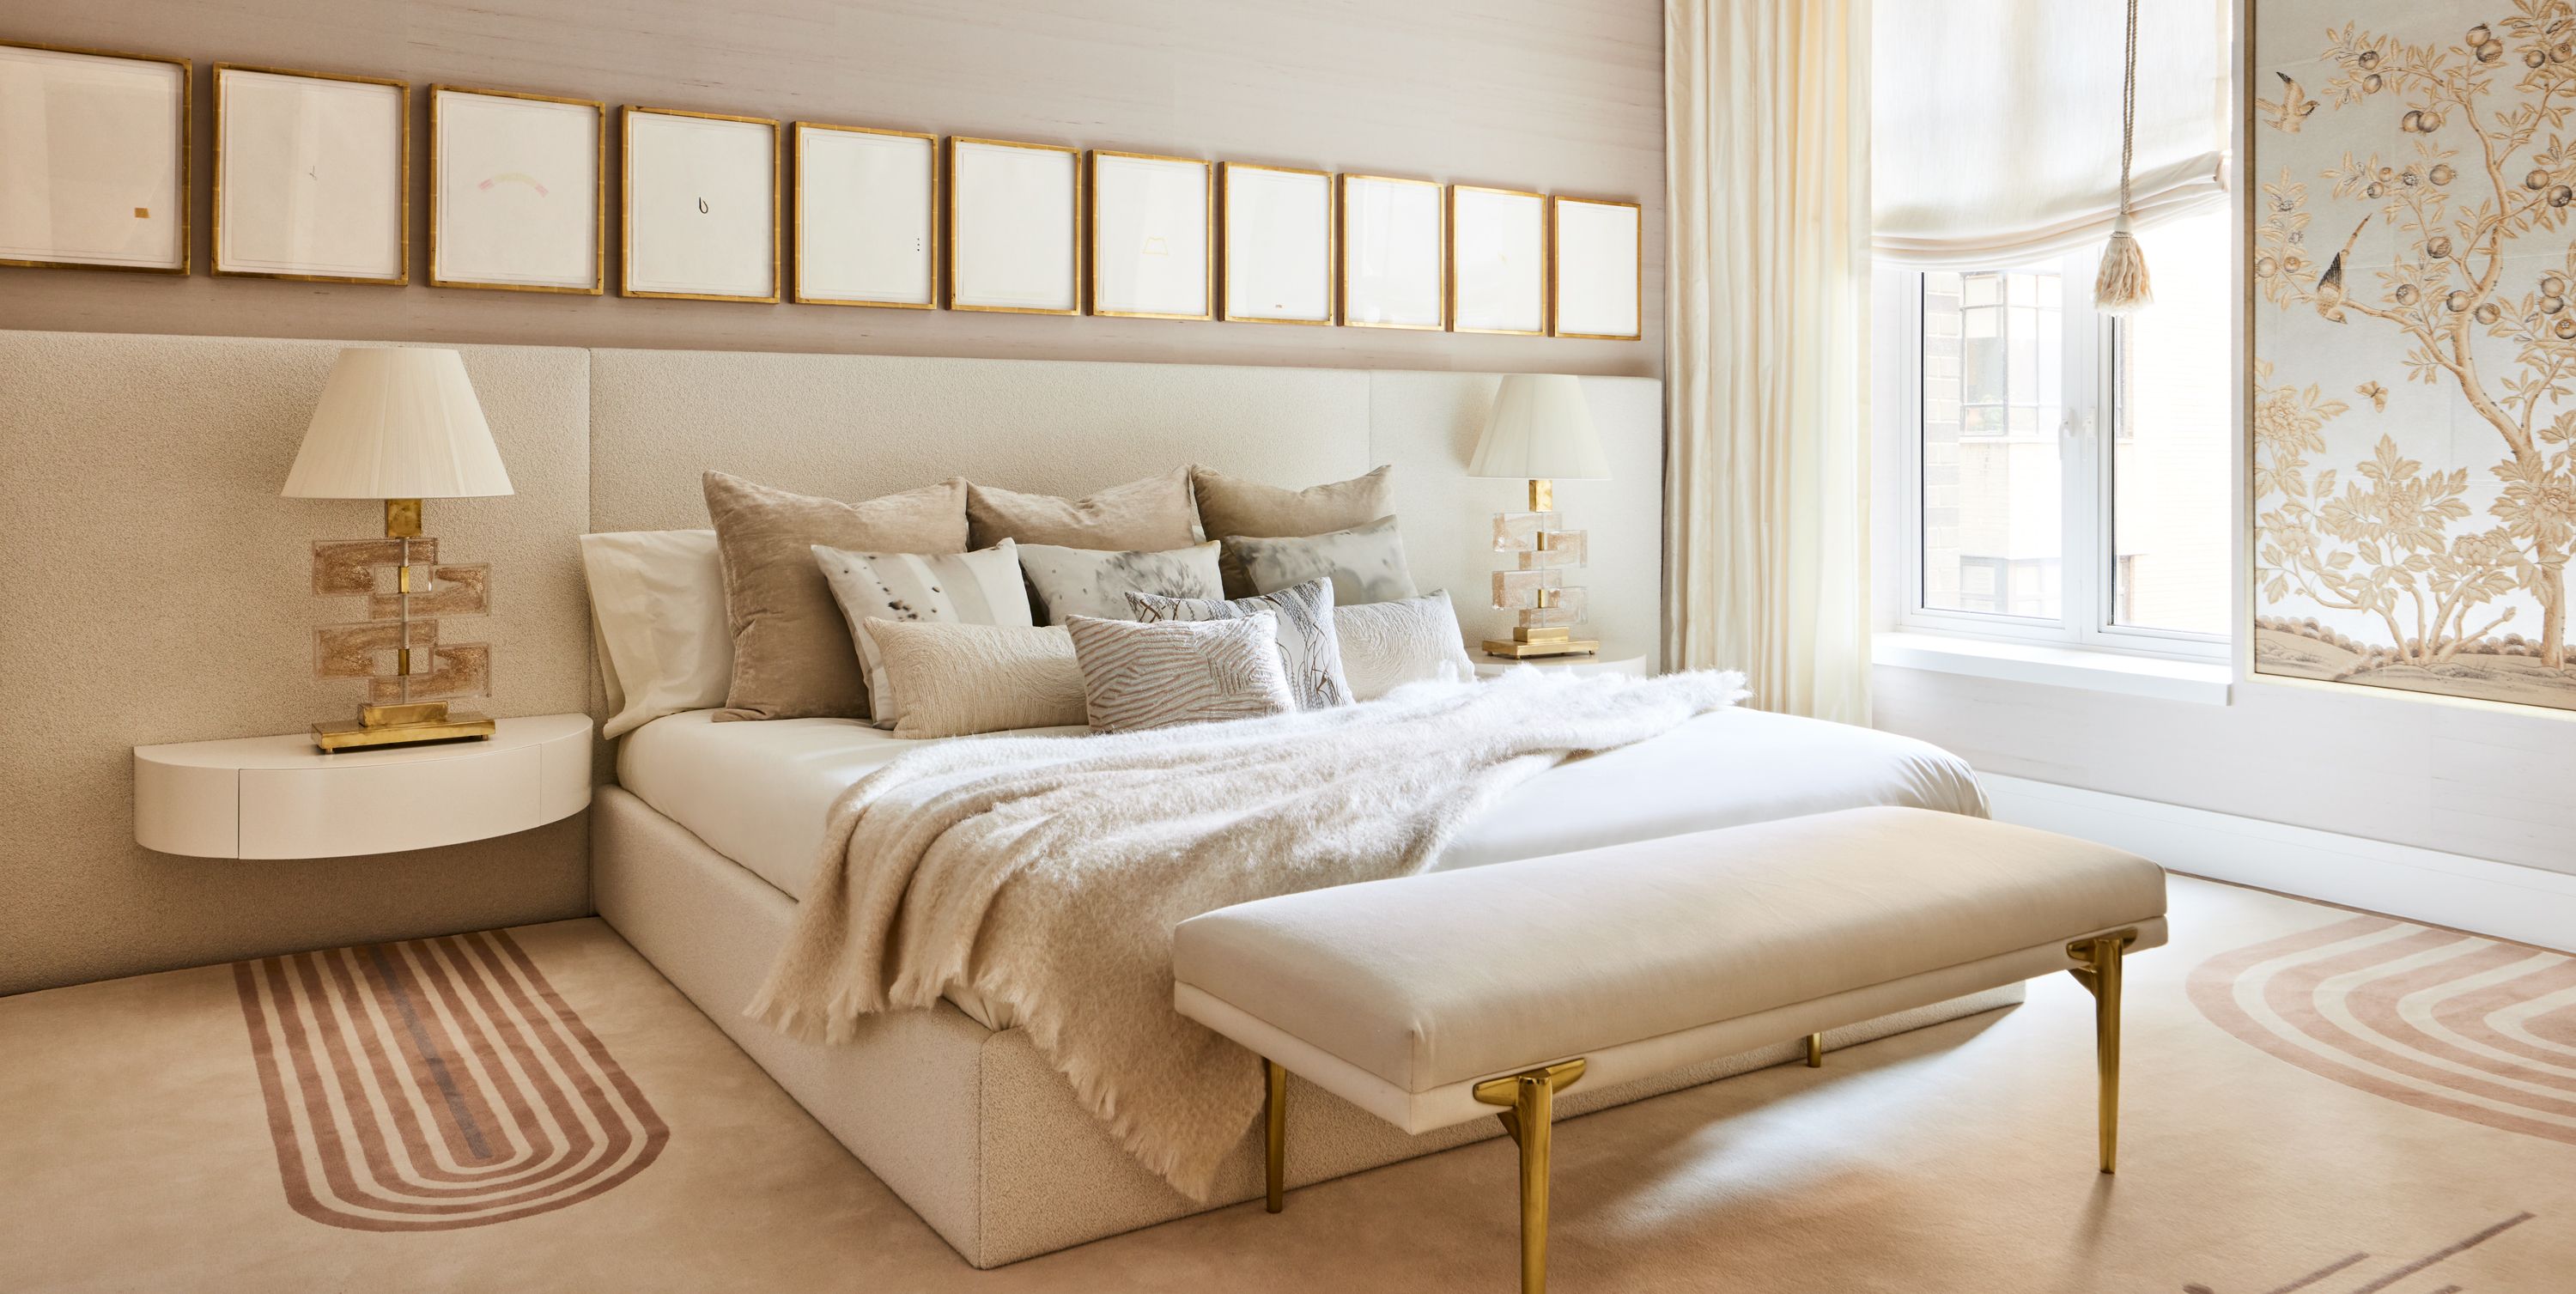 20 Luxury Bedroom Ideas: Rugs, Home Decor, Essentials, and More